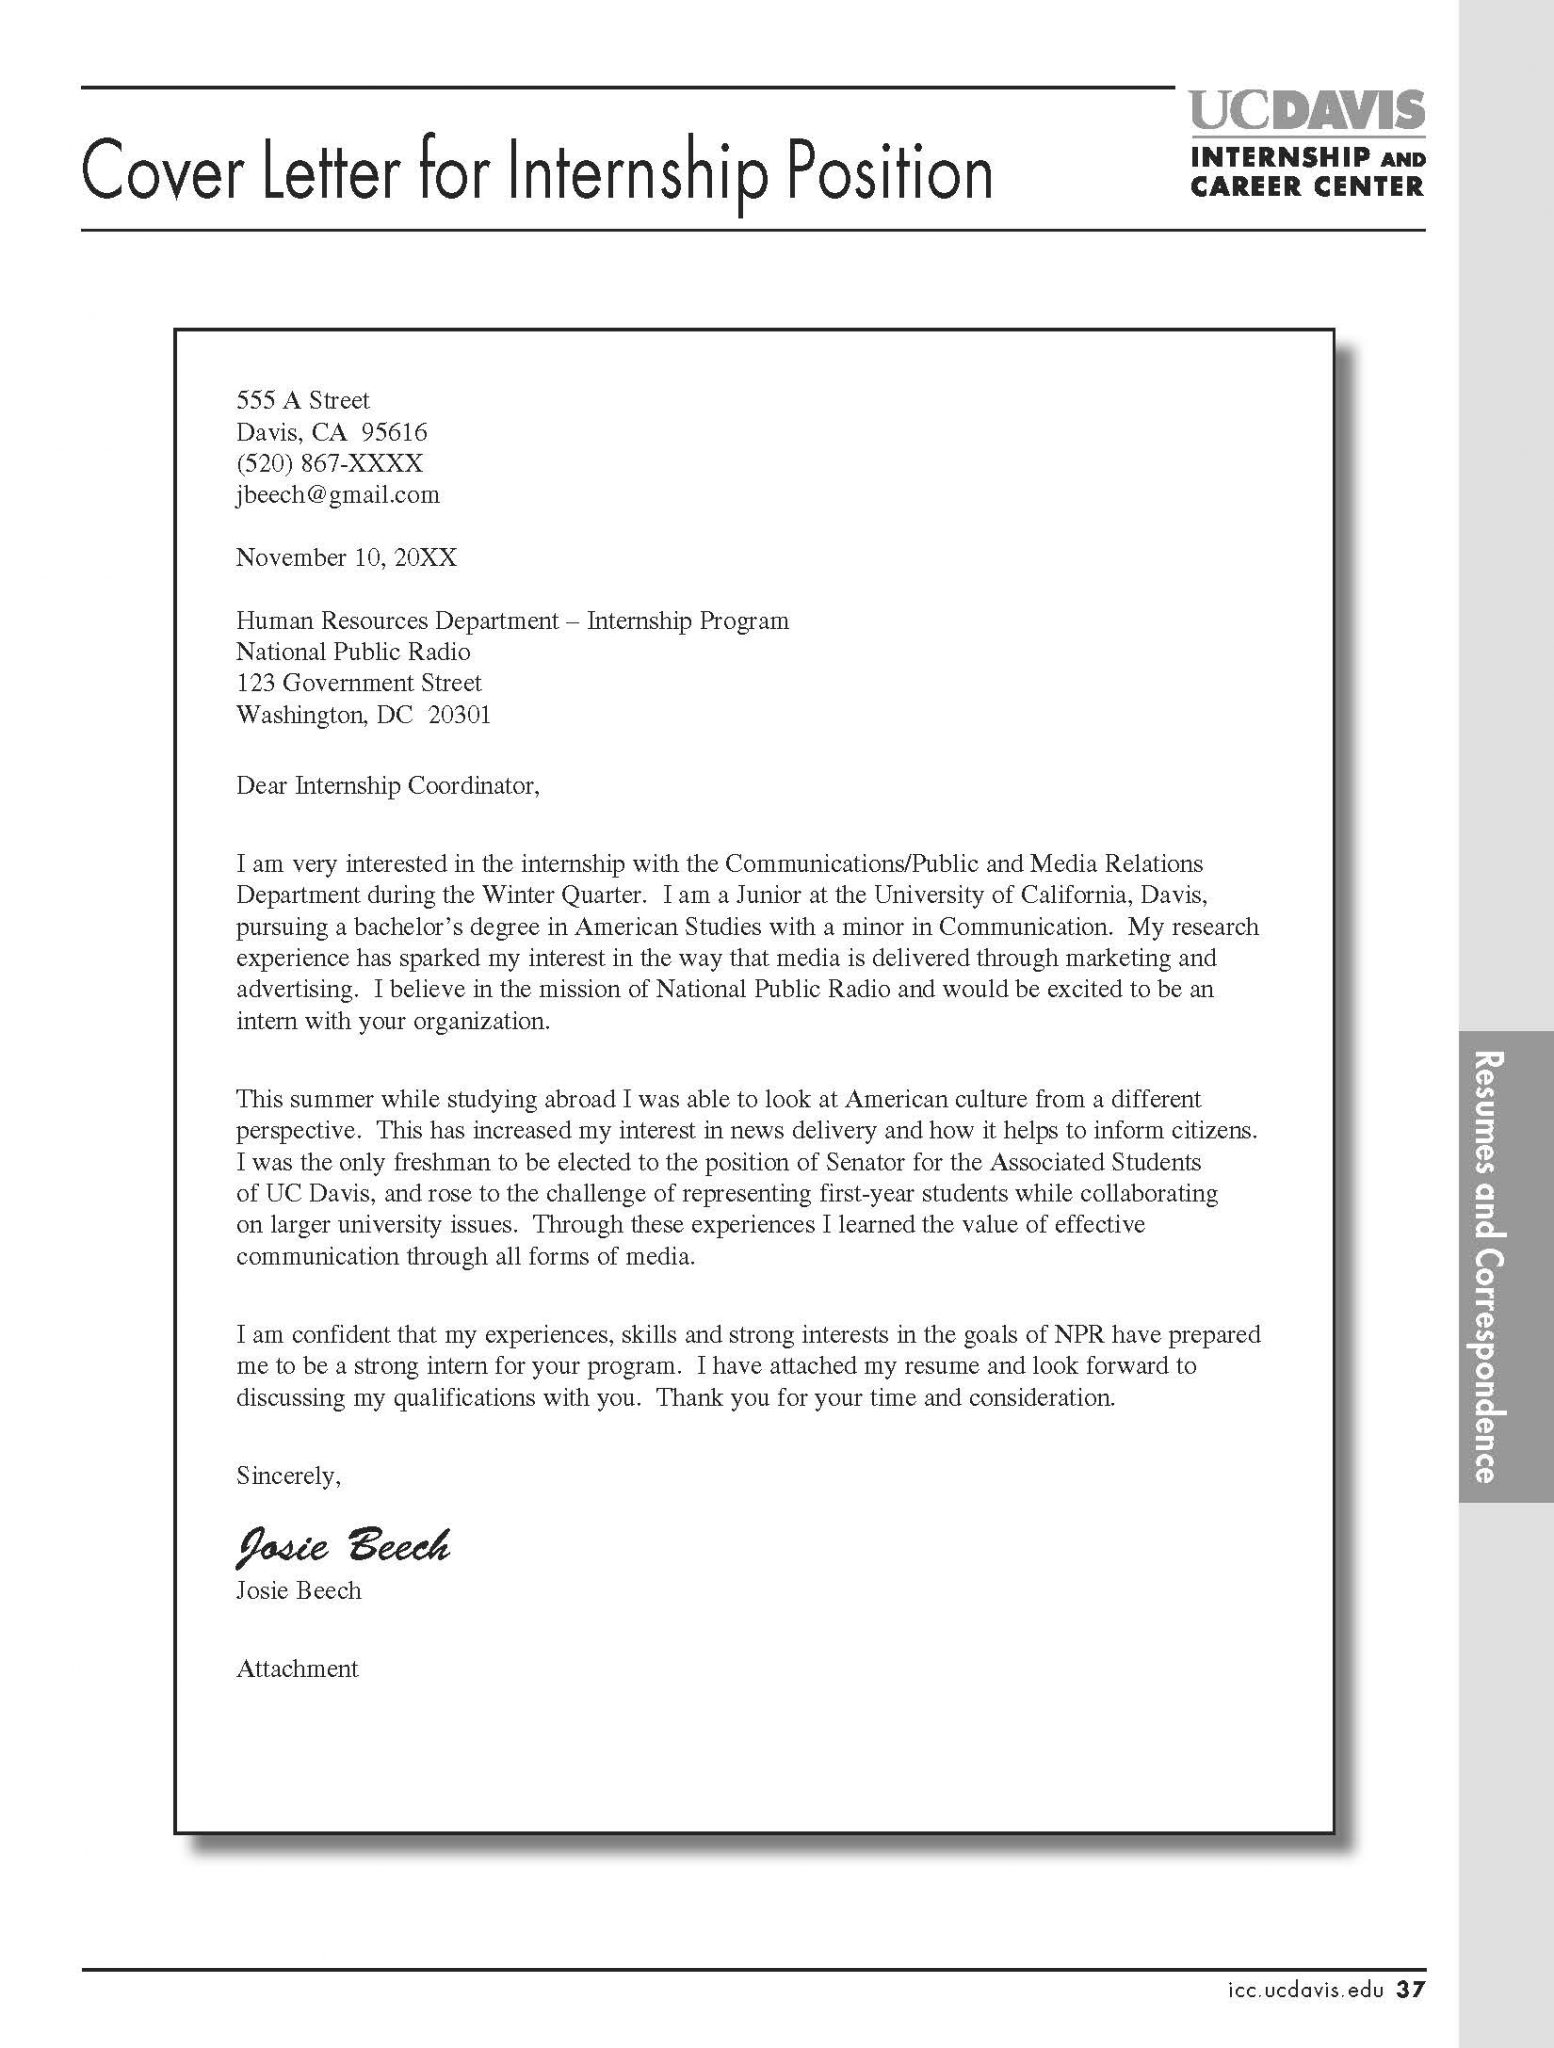 Human Resources Sample Cover Letter from content.wisestep.com